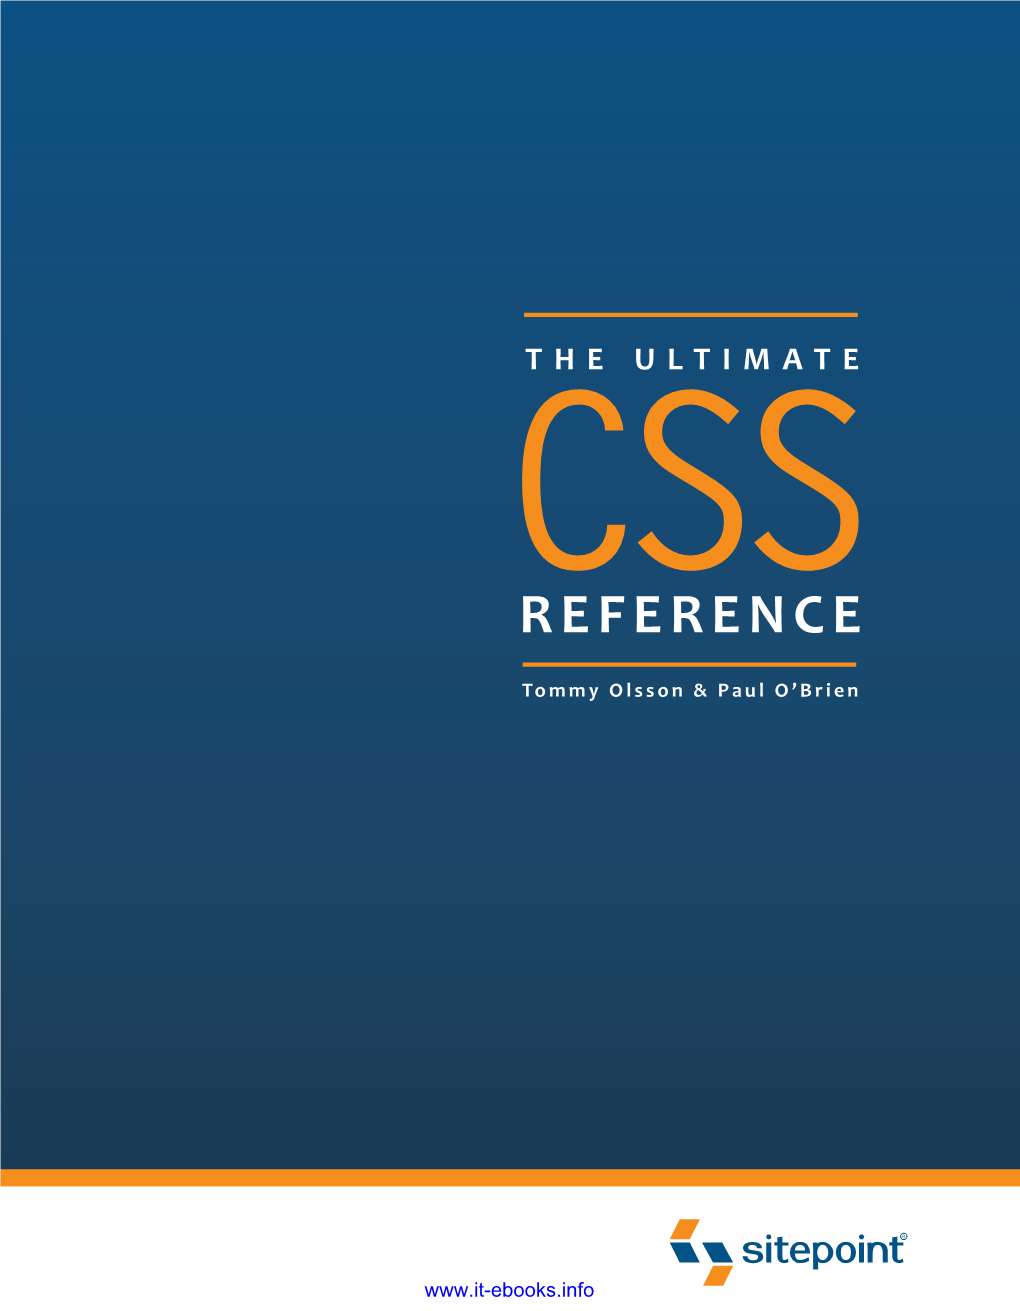 The Ultimate CSS Reference Is the Definitive Resource for Mastering CSS